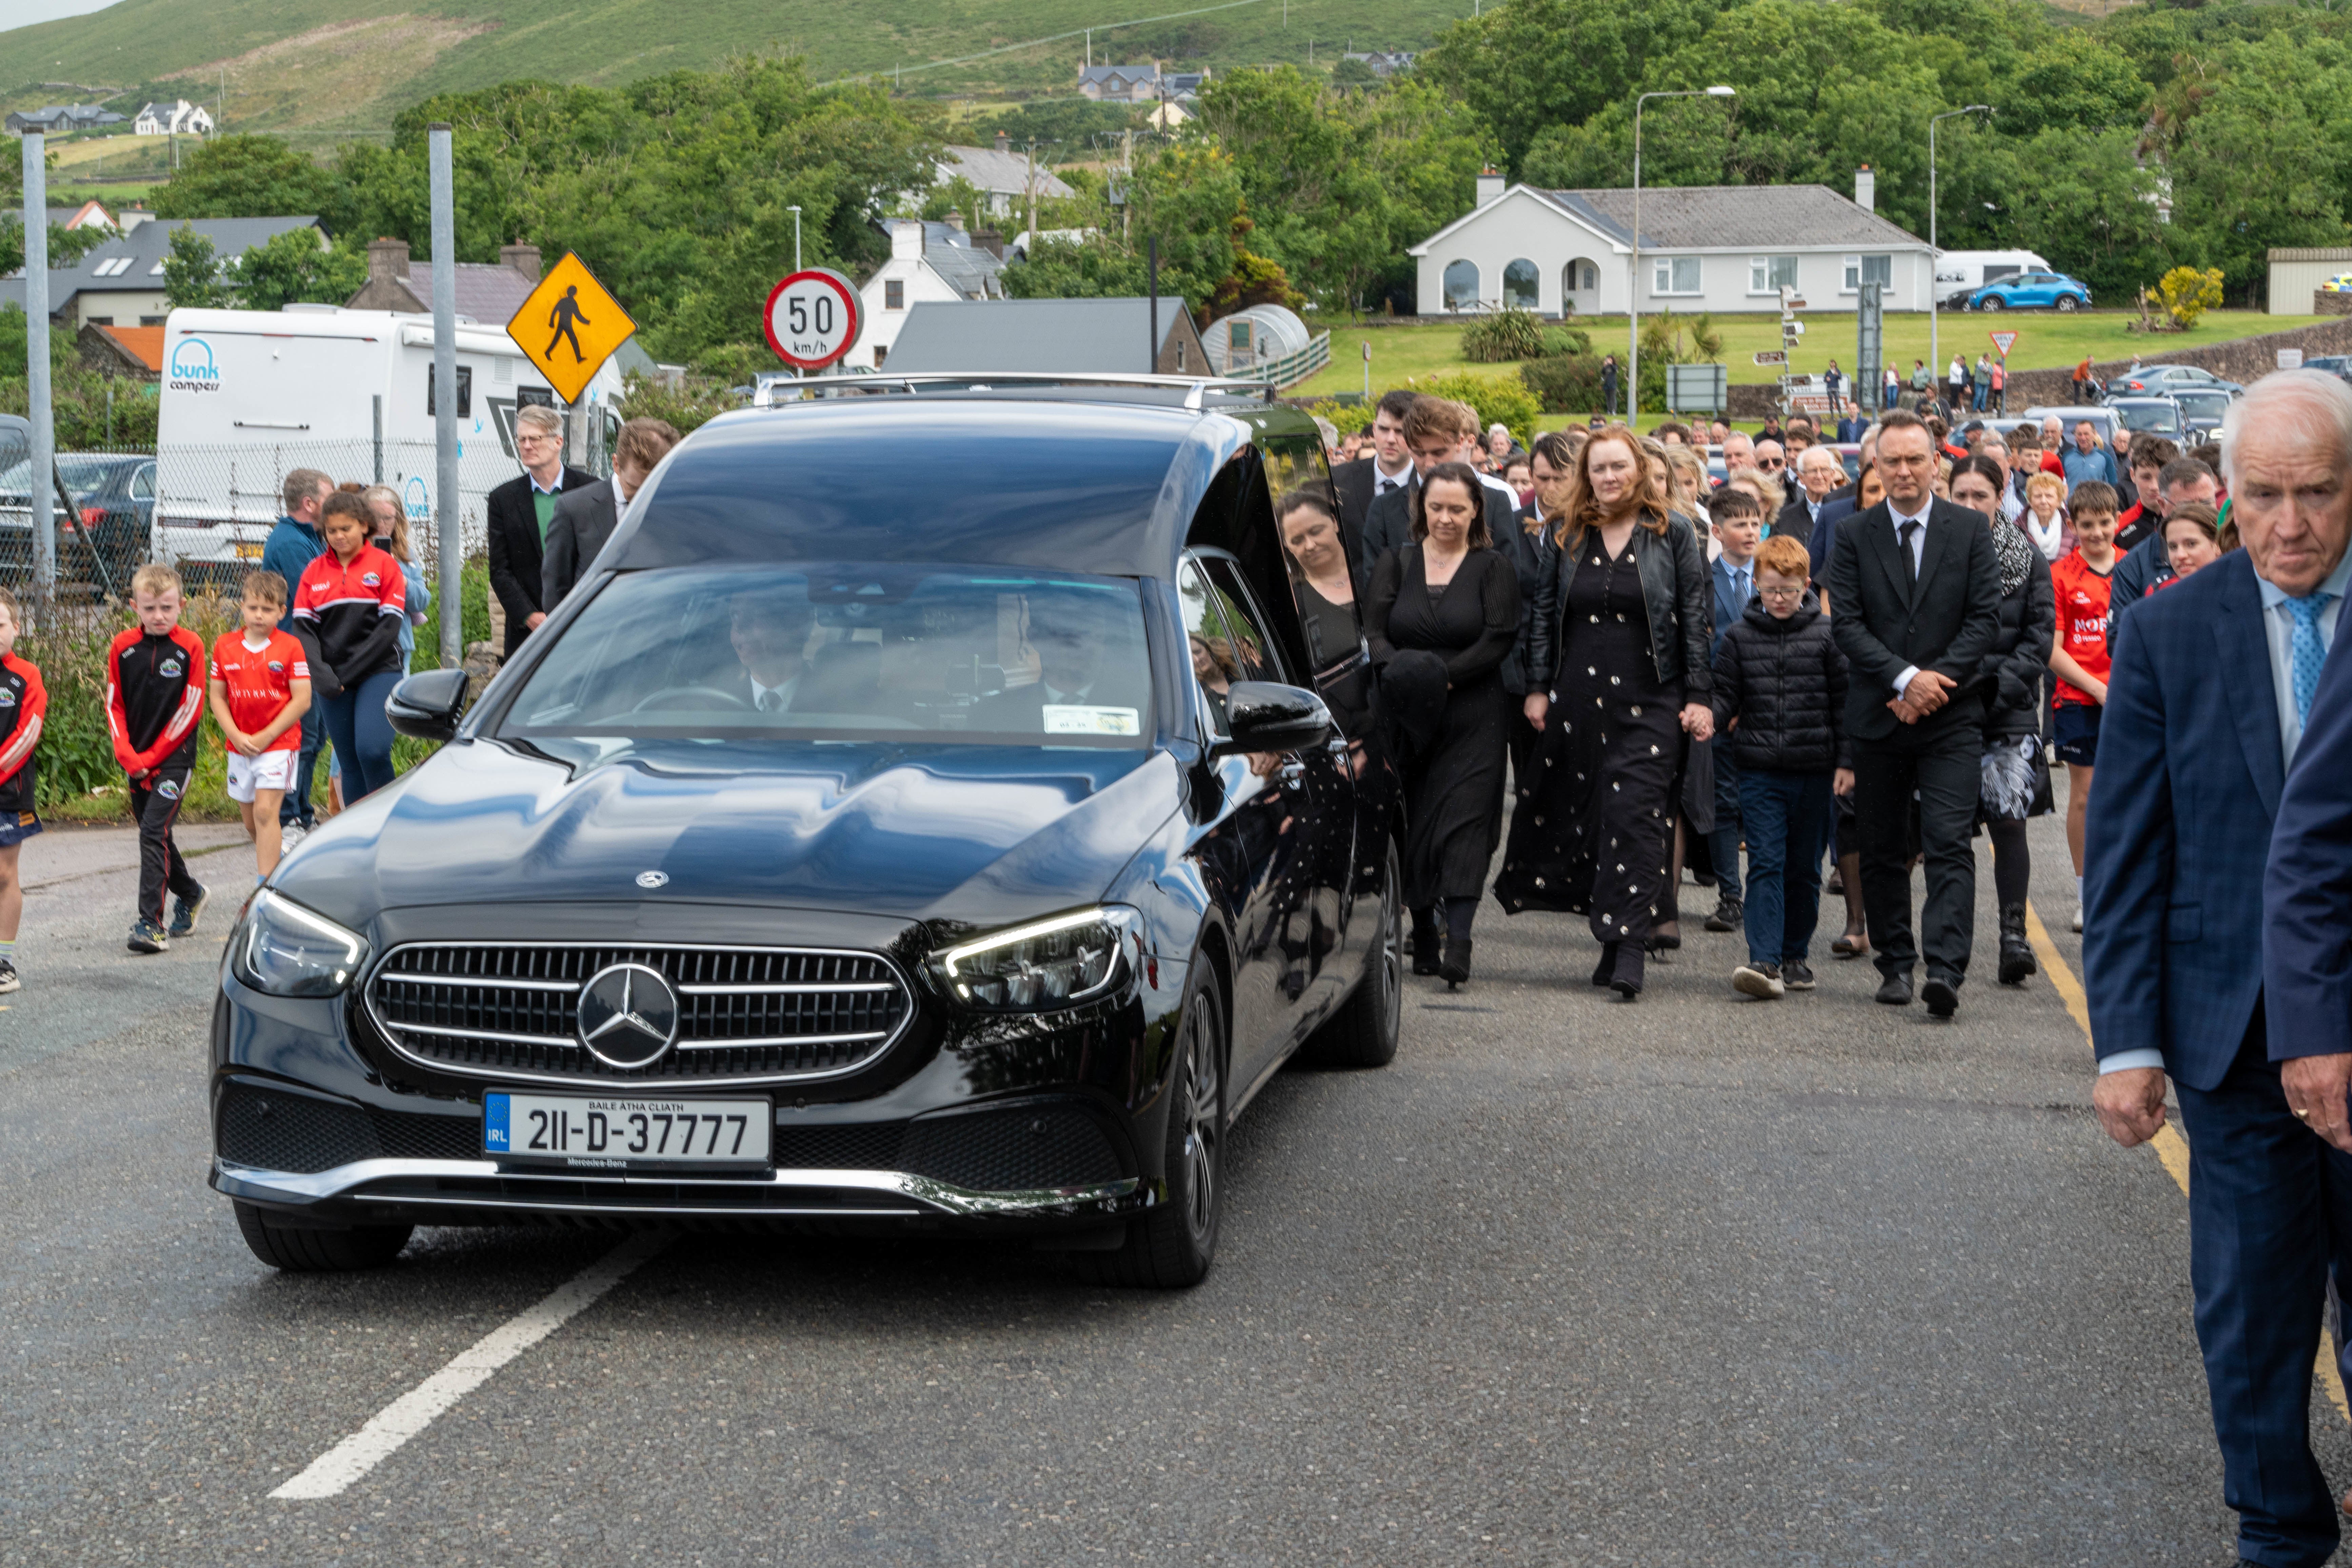 The hearse carrying renowned Gaelic games commentator Micheal O Muircheartaigh following his funeral at St Mary’s Church in Dingle, Co Kerry (Noel Sweeney/PA)